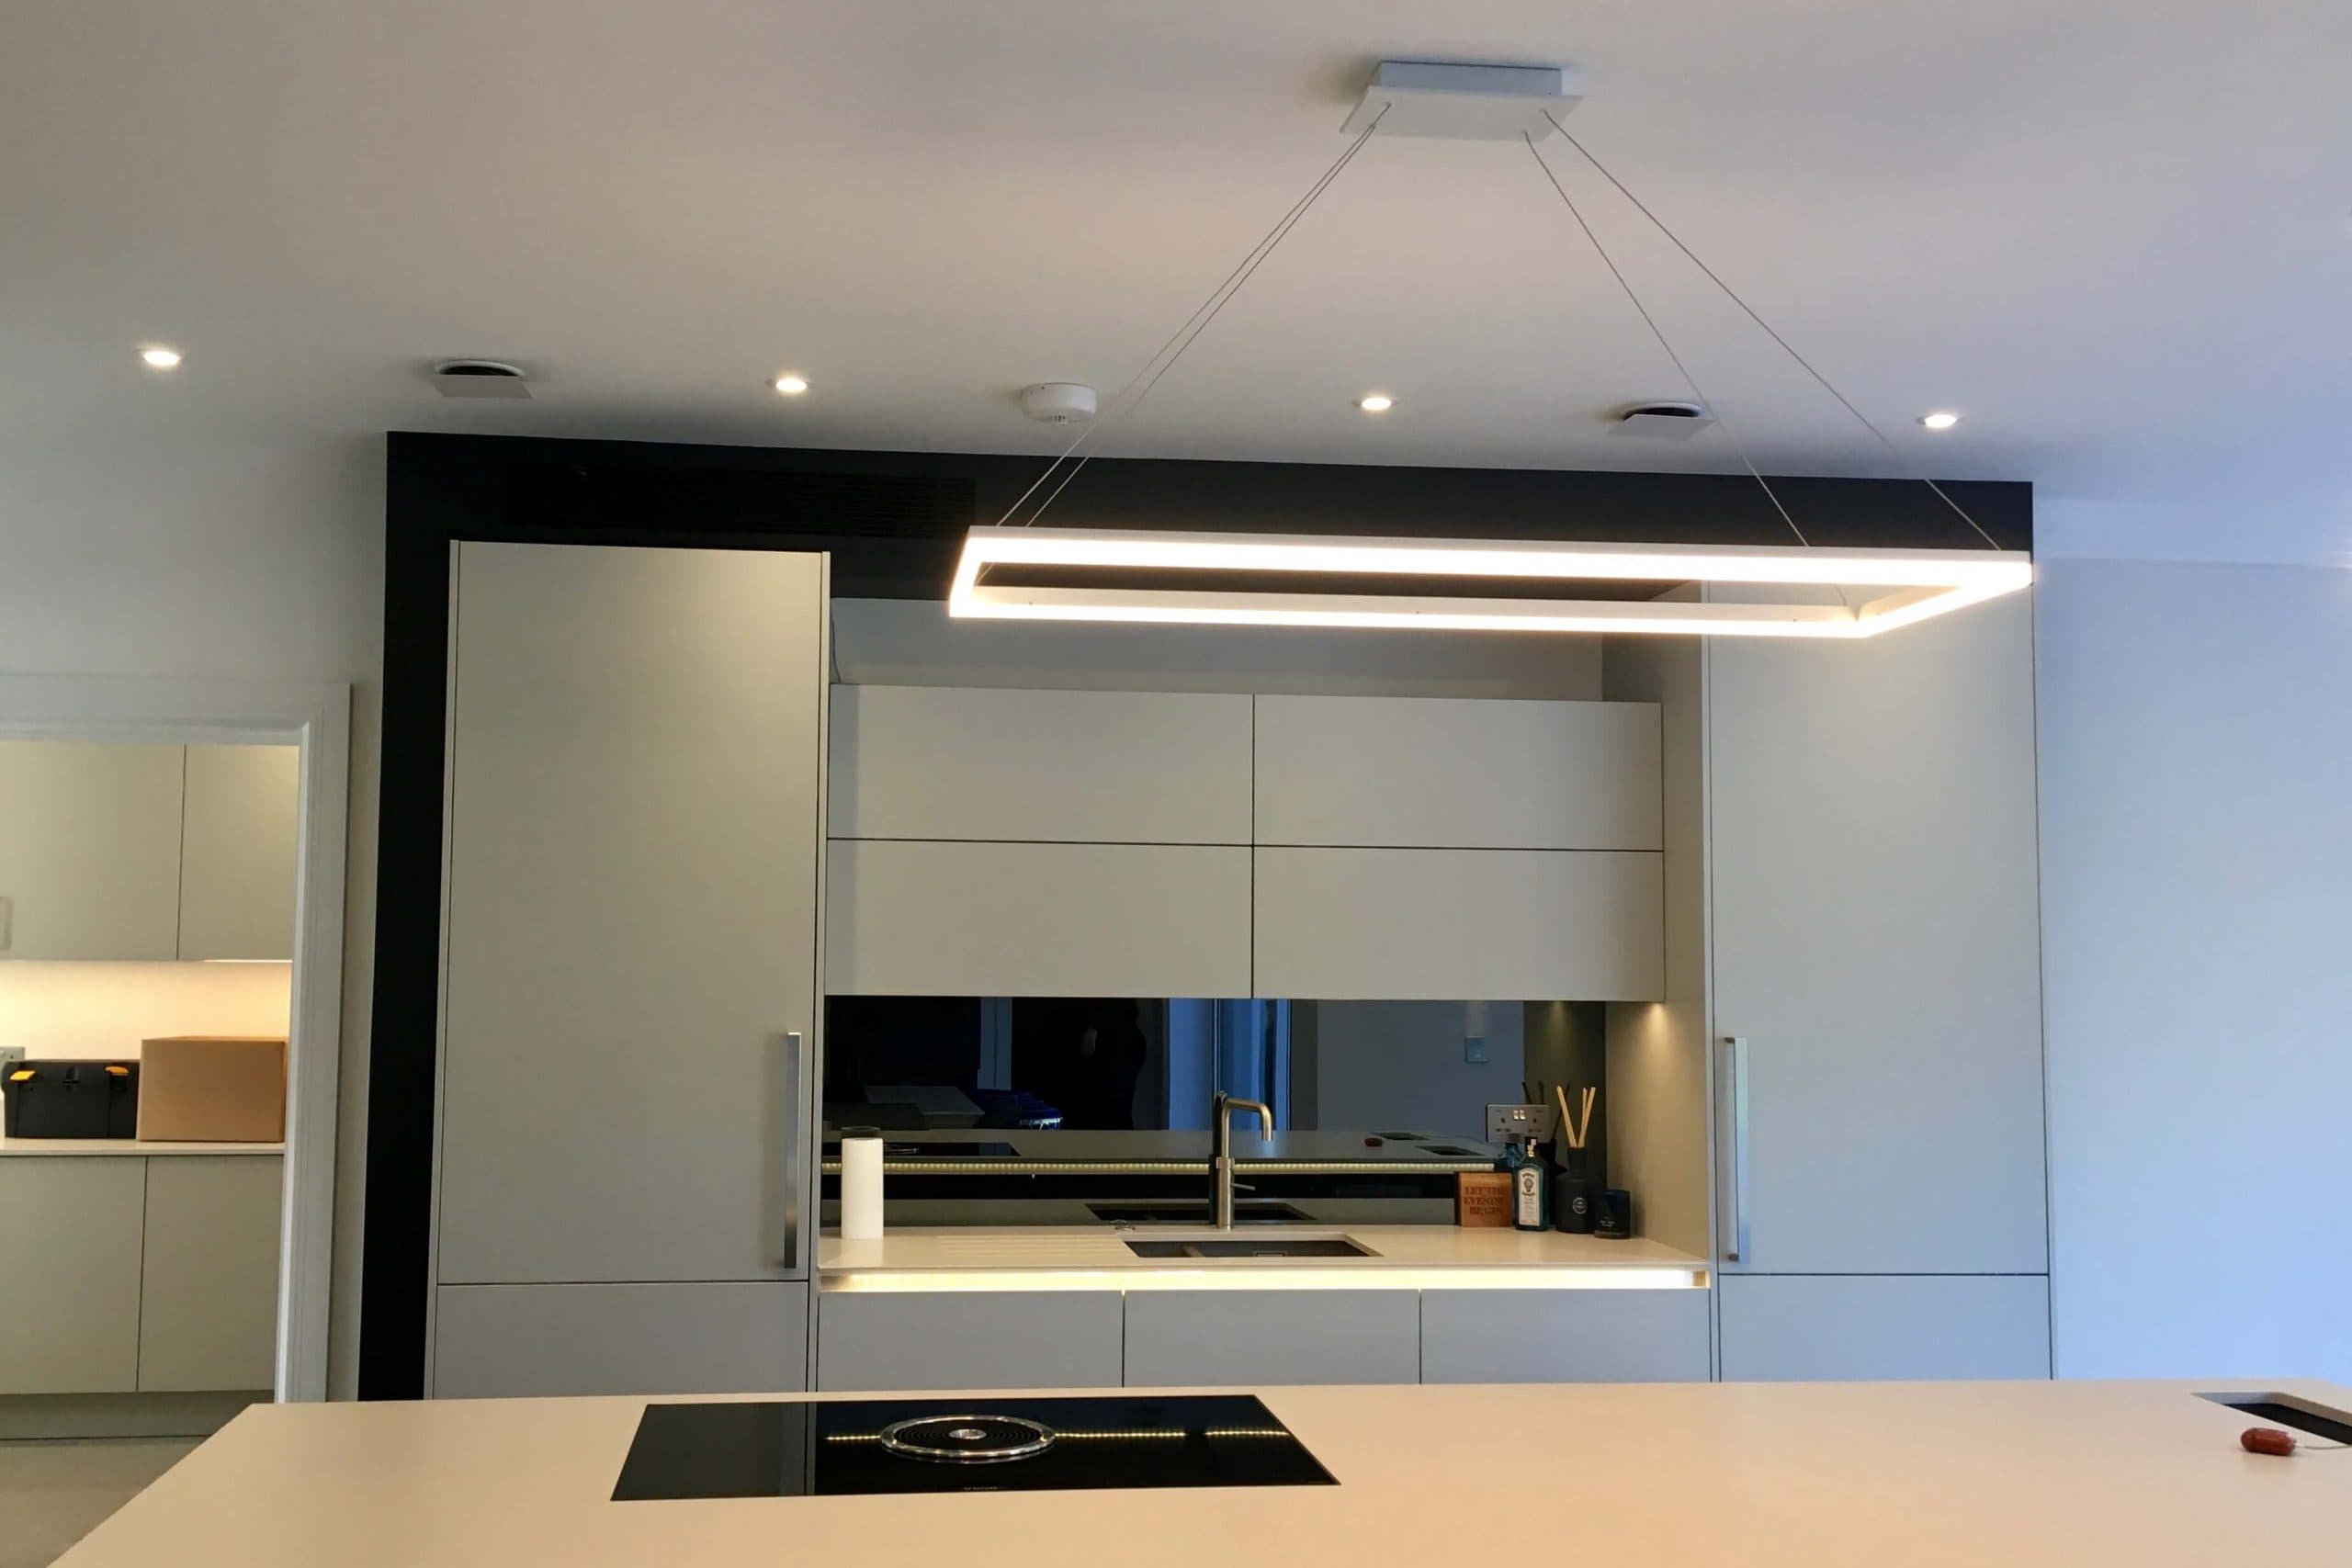 Scandia Hus new build kitchen with invisible Mitsubishi air con grill and MVHR system by SubCool FM hidden door to chill room shut